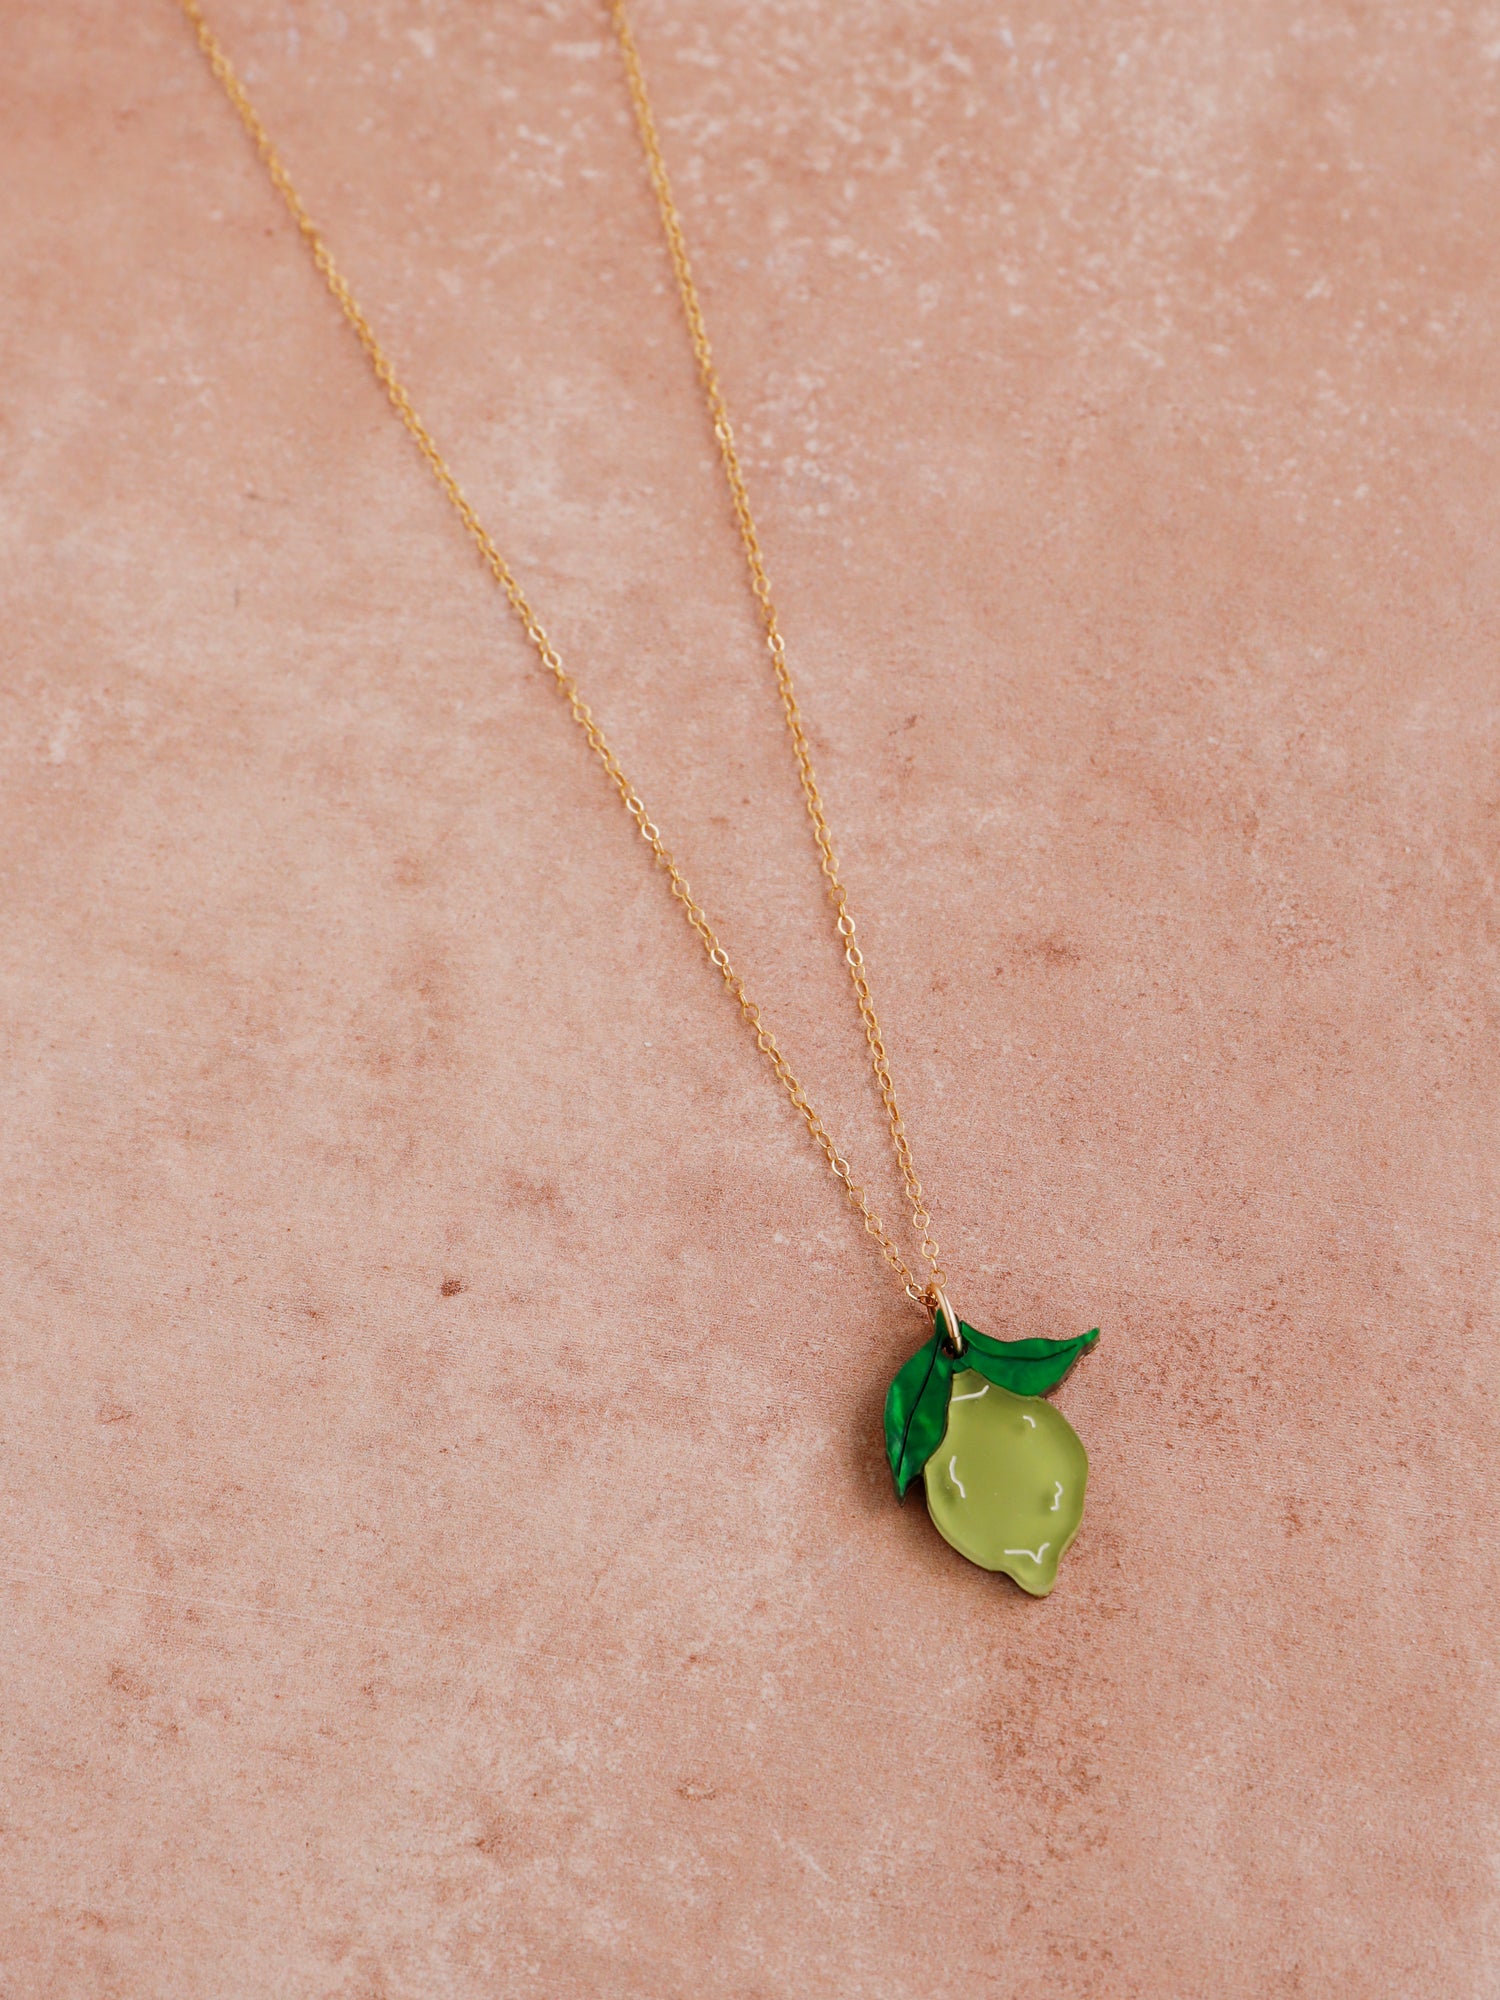 Lime pendant necklace with green leaf made with wood, 64% recycled acrylic and hand-inked details. Hung on a high quality 45cm gold-filled chain. Handmade in the UK by Wolf & Moon.